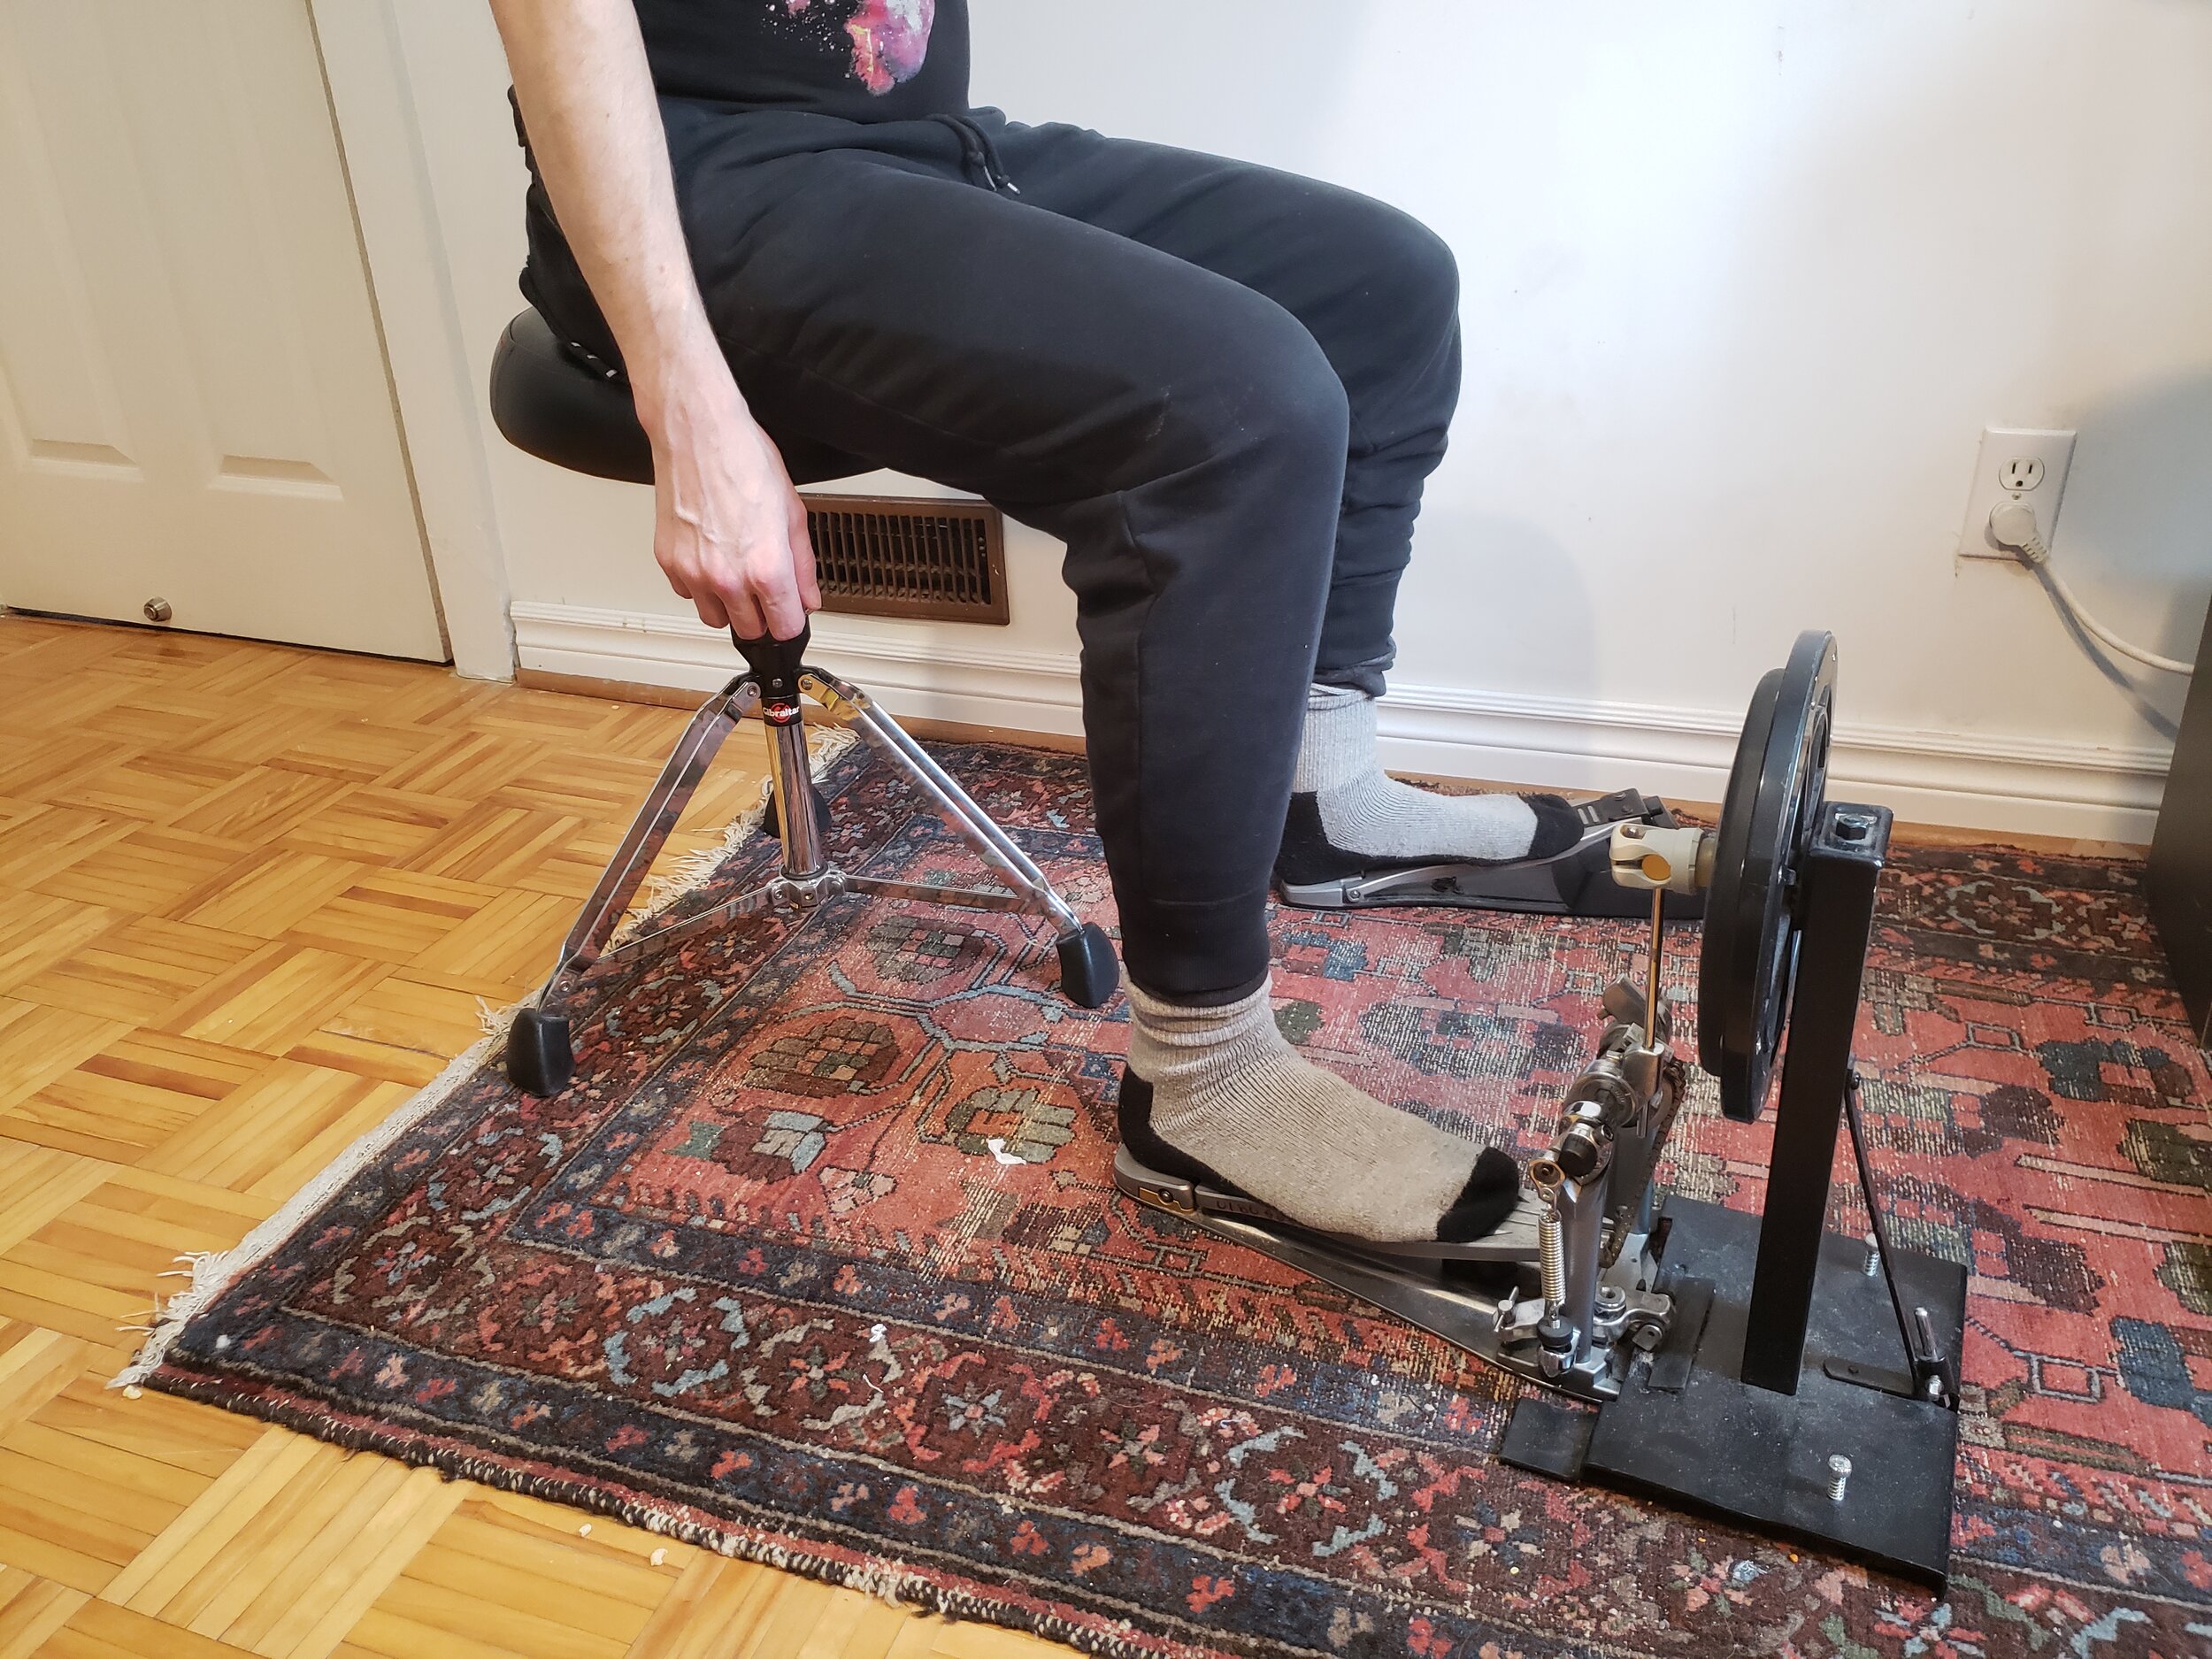 Springless Bass Drum Pedals from Airlogic